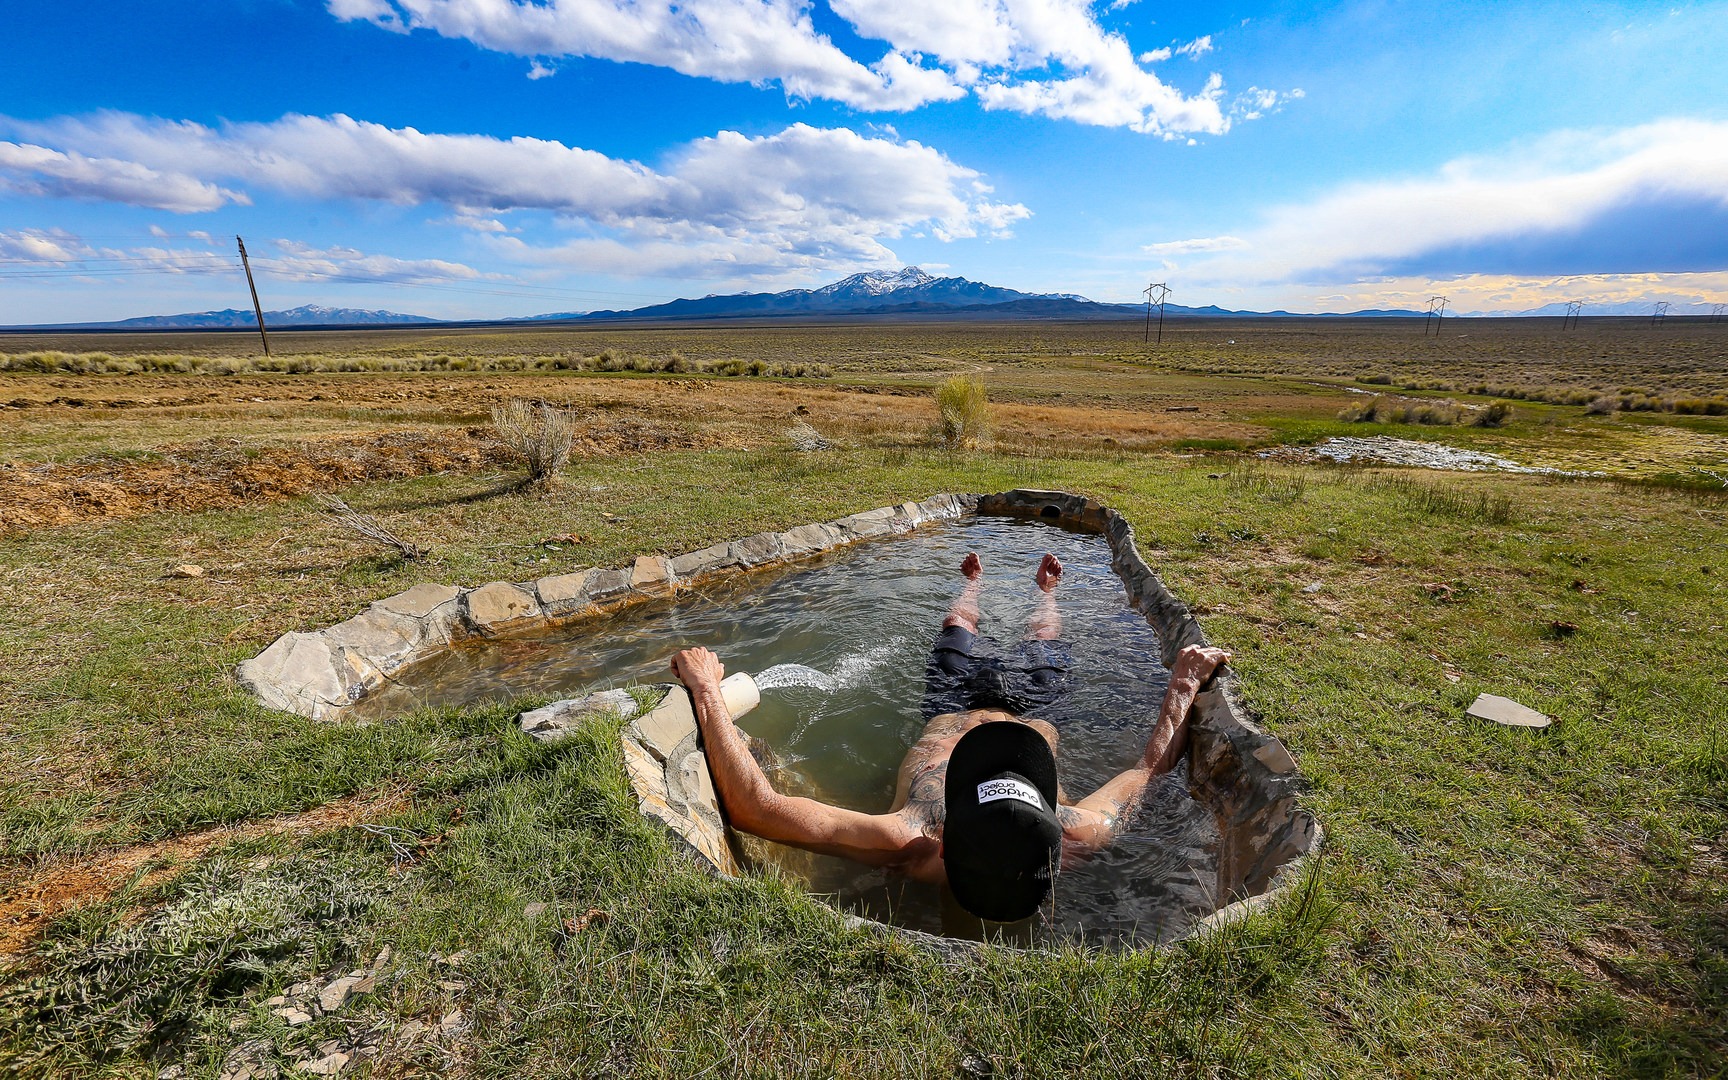 At Home Nudist Clothing Optional - The Naked Truth About Hot Springs | Outdoor Project